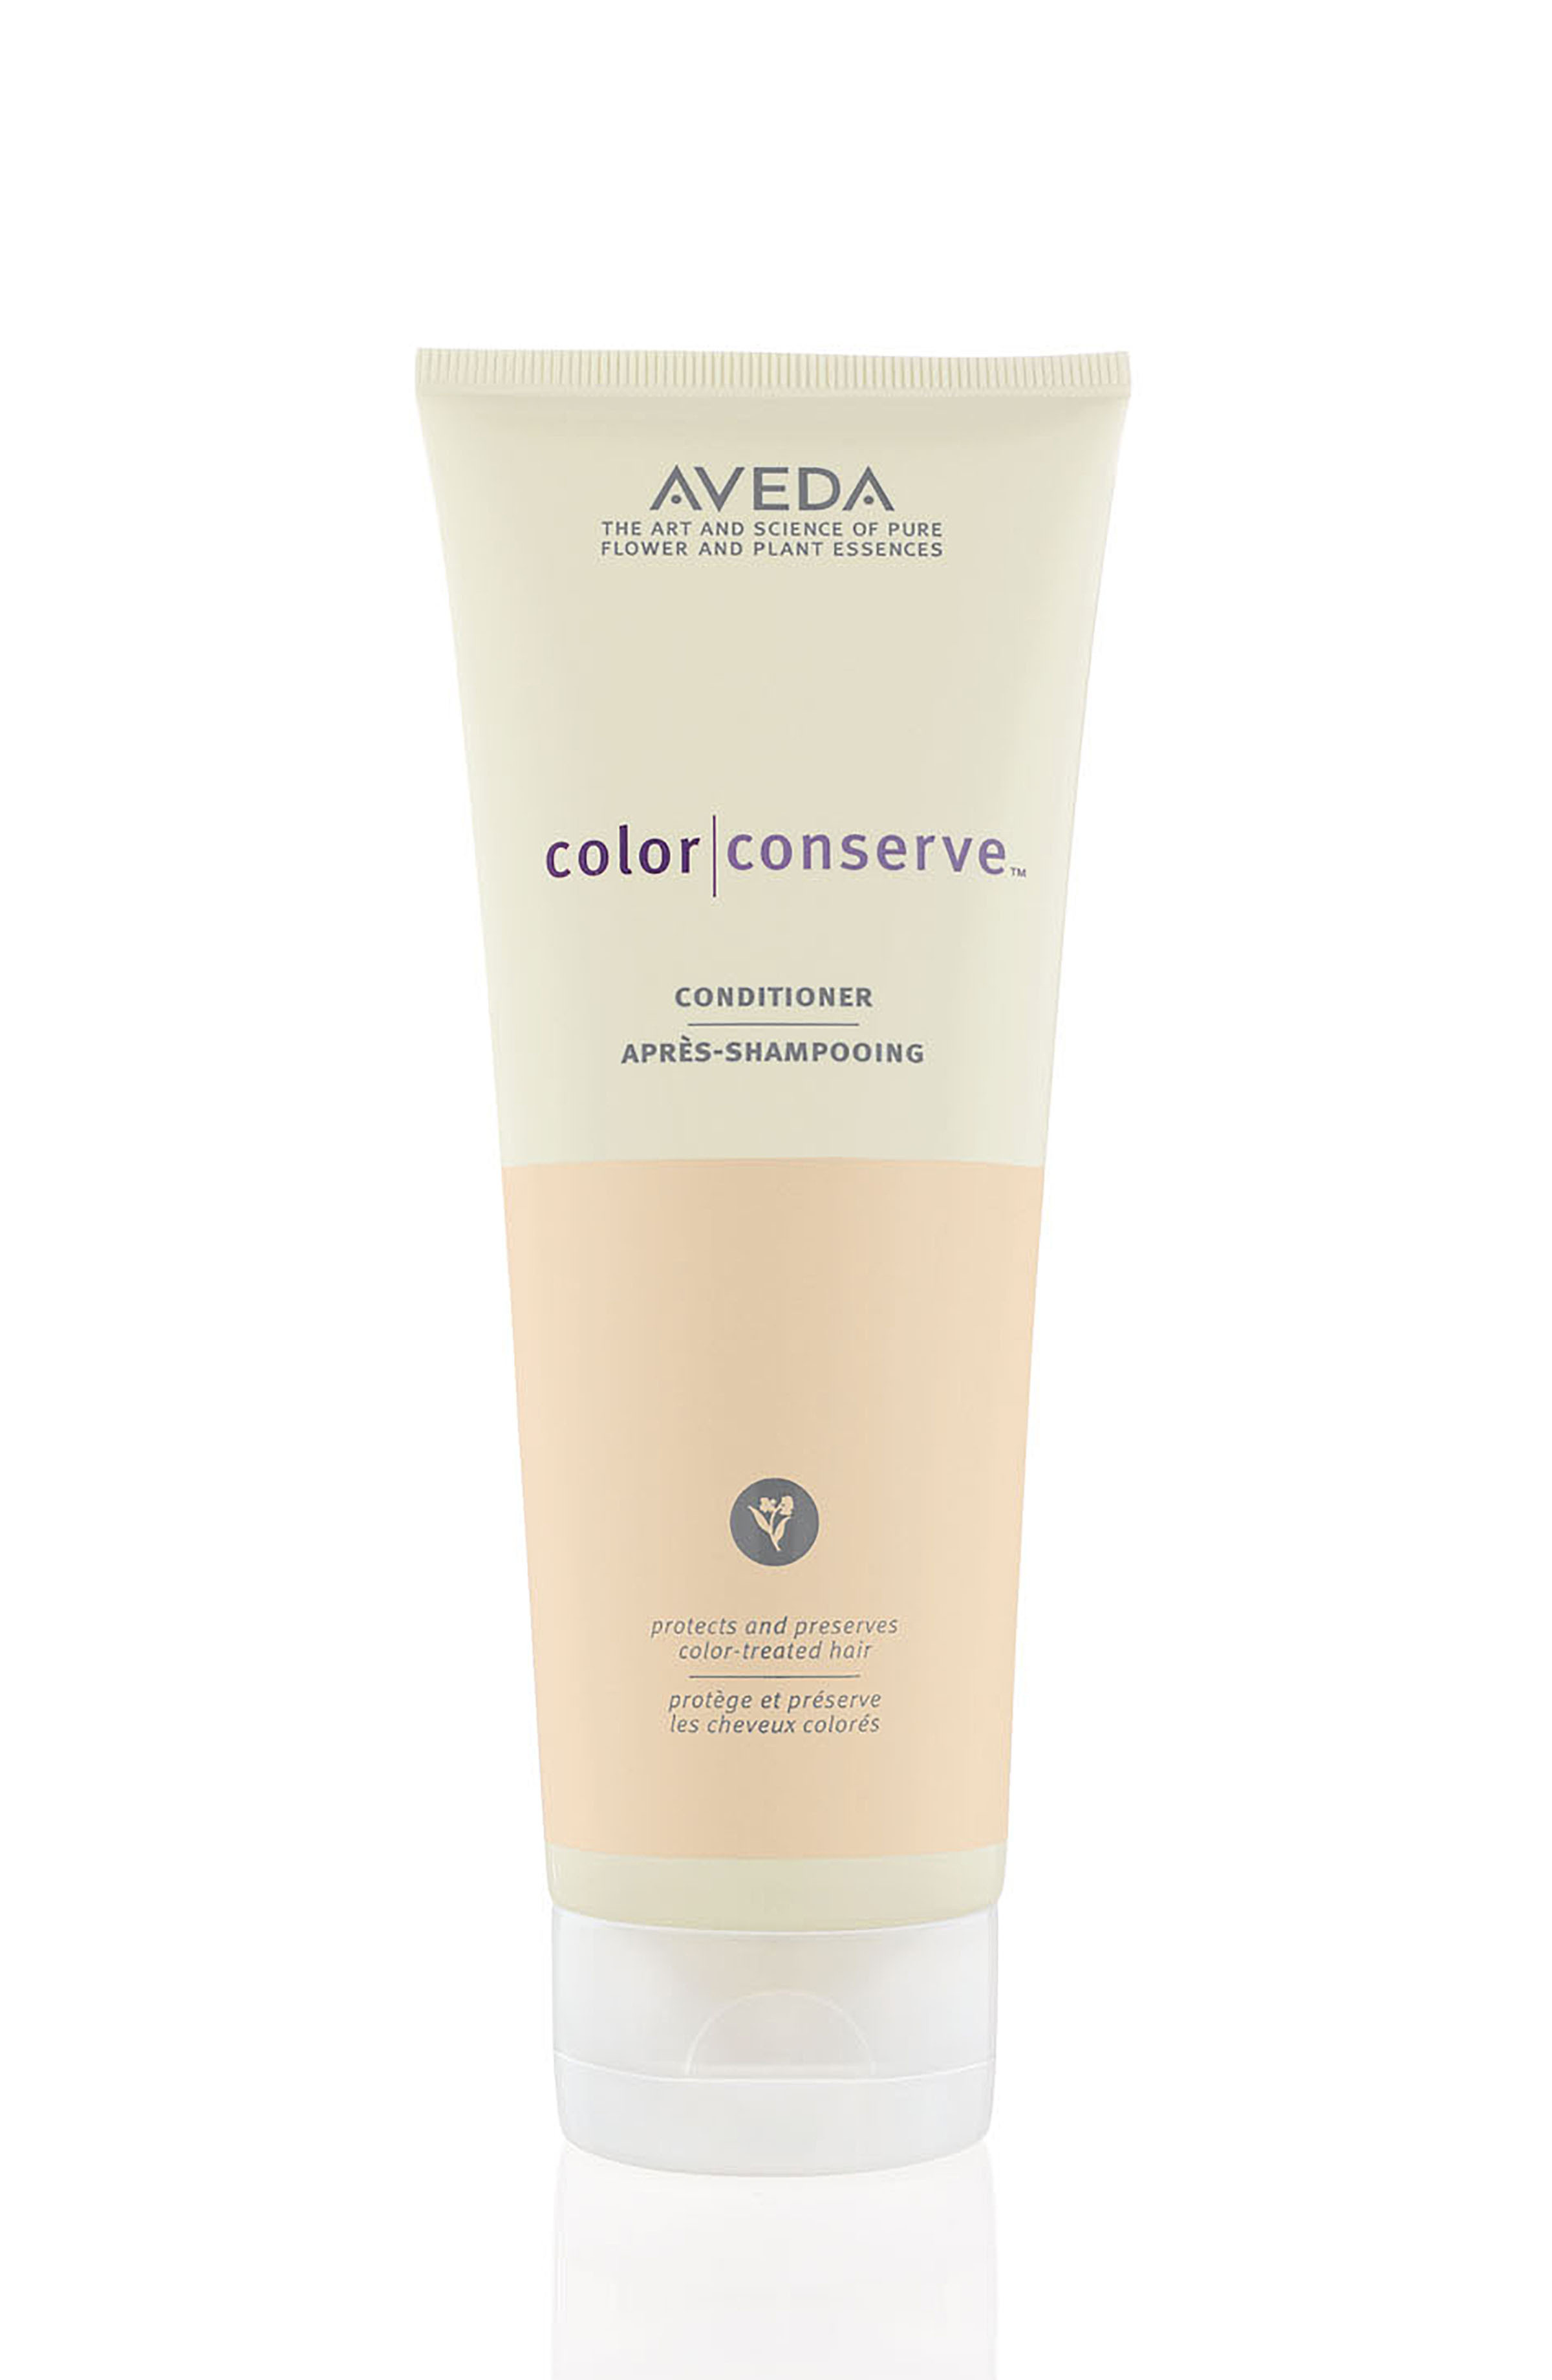 Aveda color conserve conditioner 200 ml, White, large image number 0